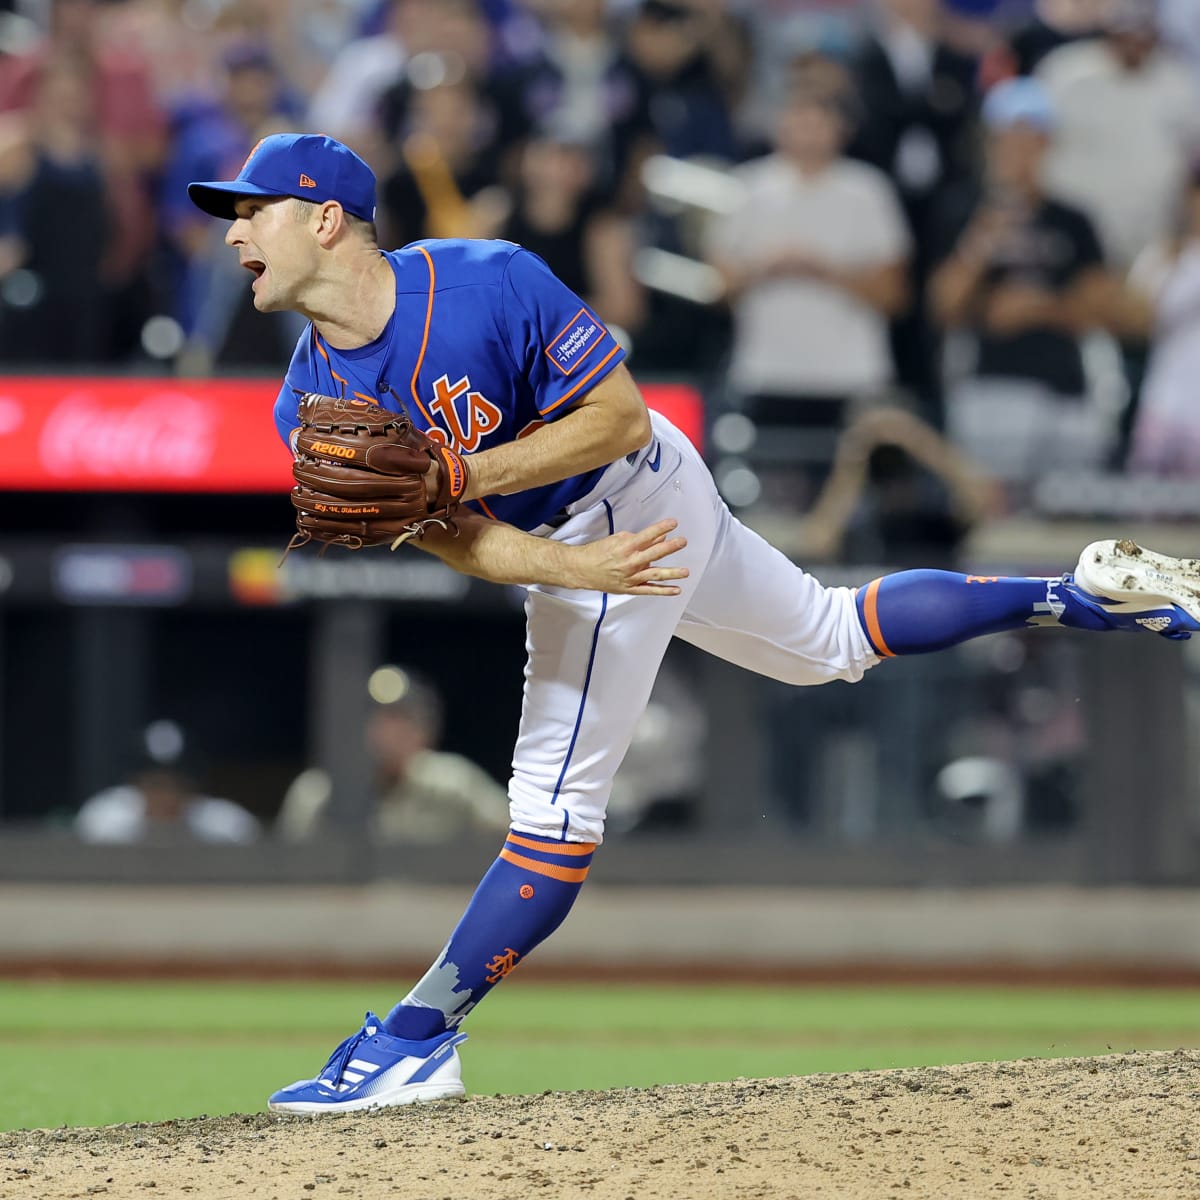 David Robertson's Downfall: From NY Mets star to Marlins sidelined